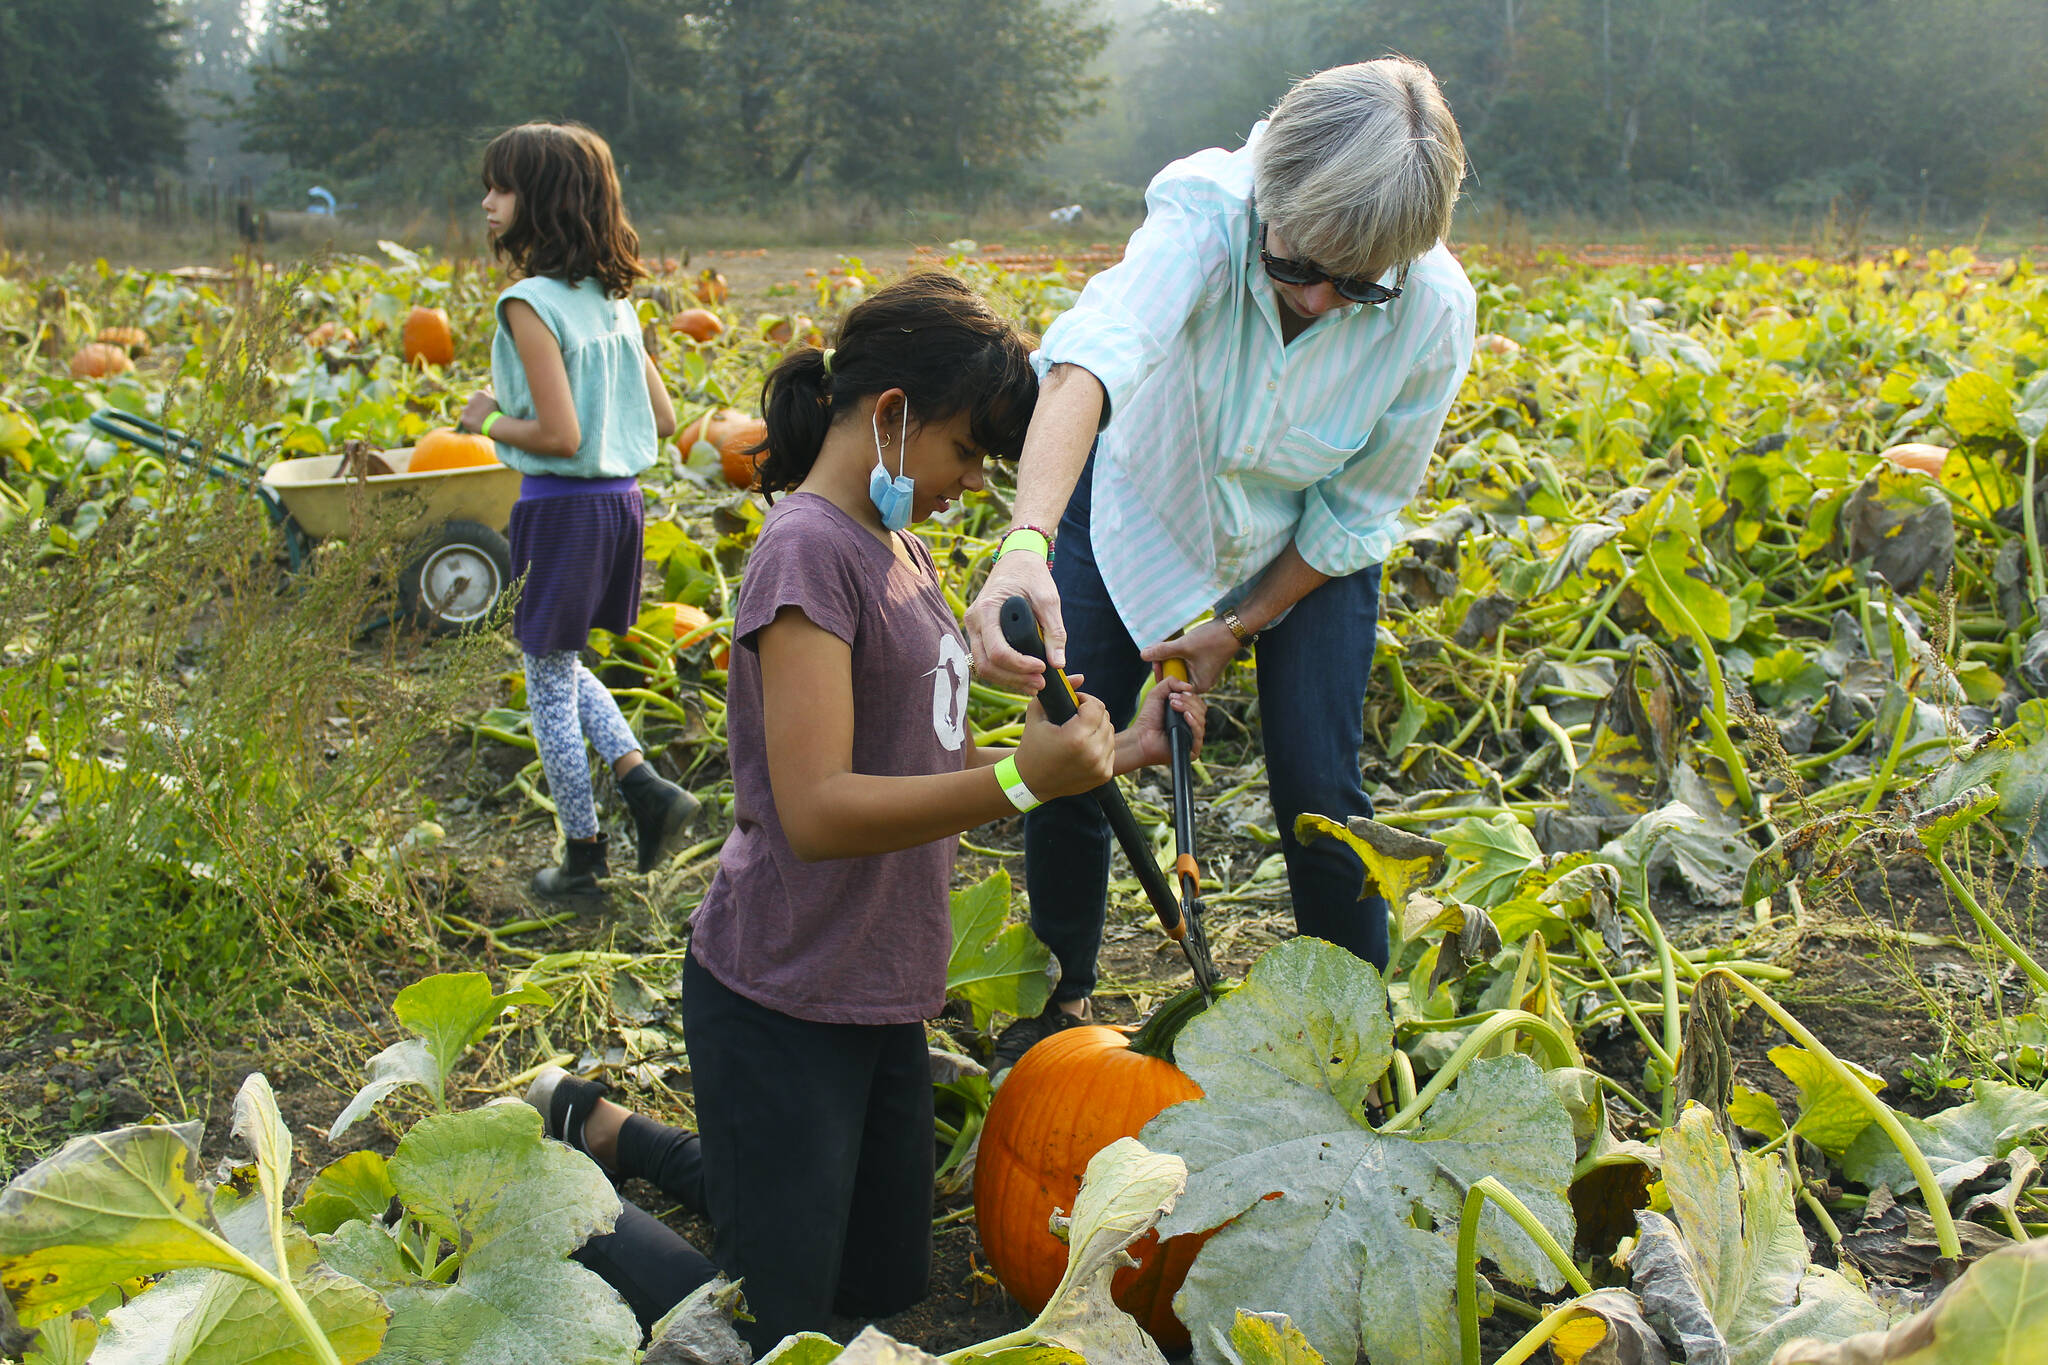 Elena Davila and her grandmother cutting a pumpkin off the vine in Thomasson Family Farm’s pumpkin patch last year. Photo by Ray Miller-Still